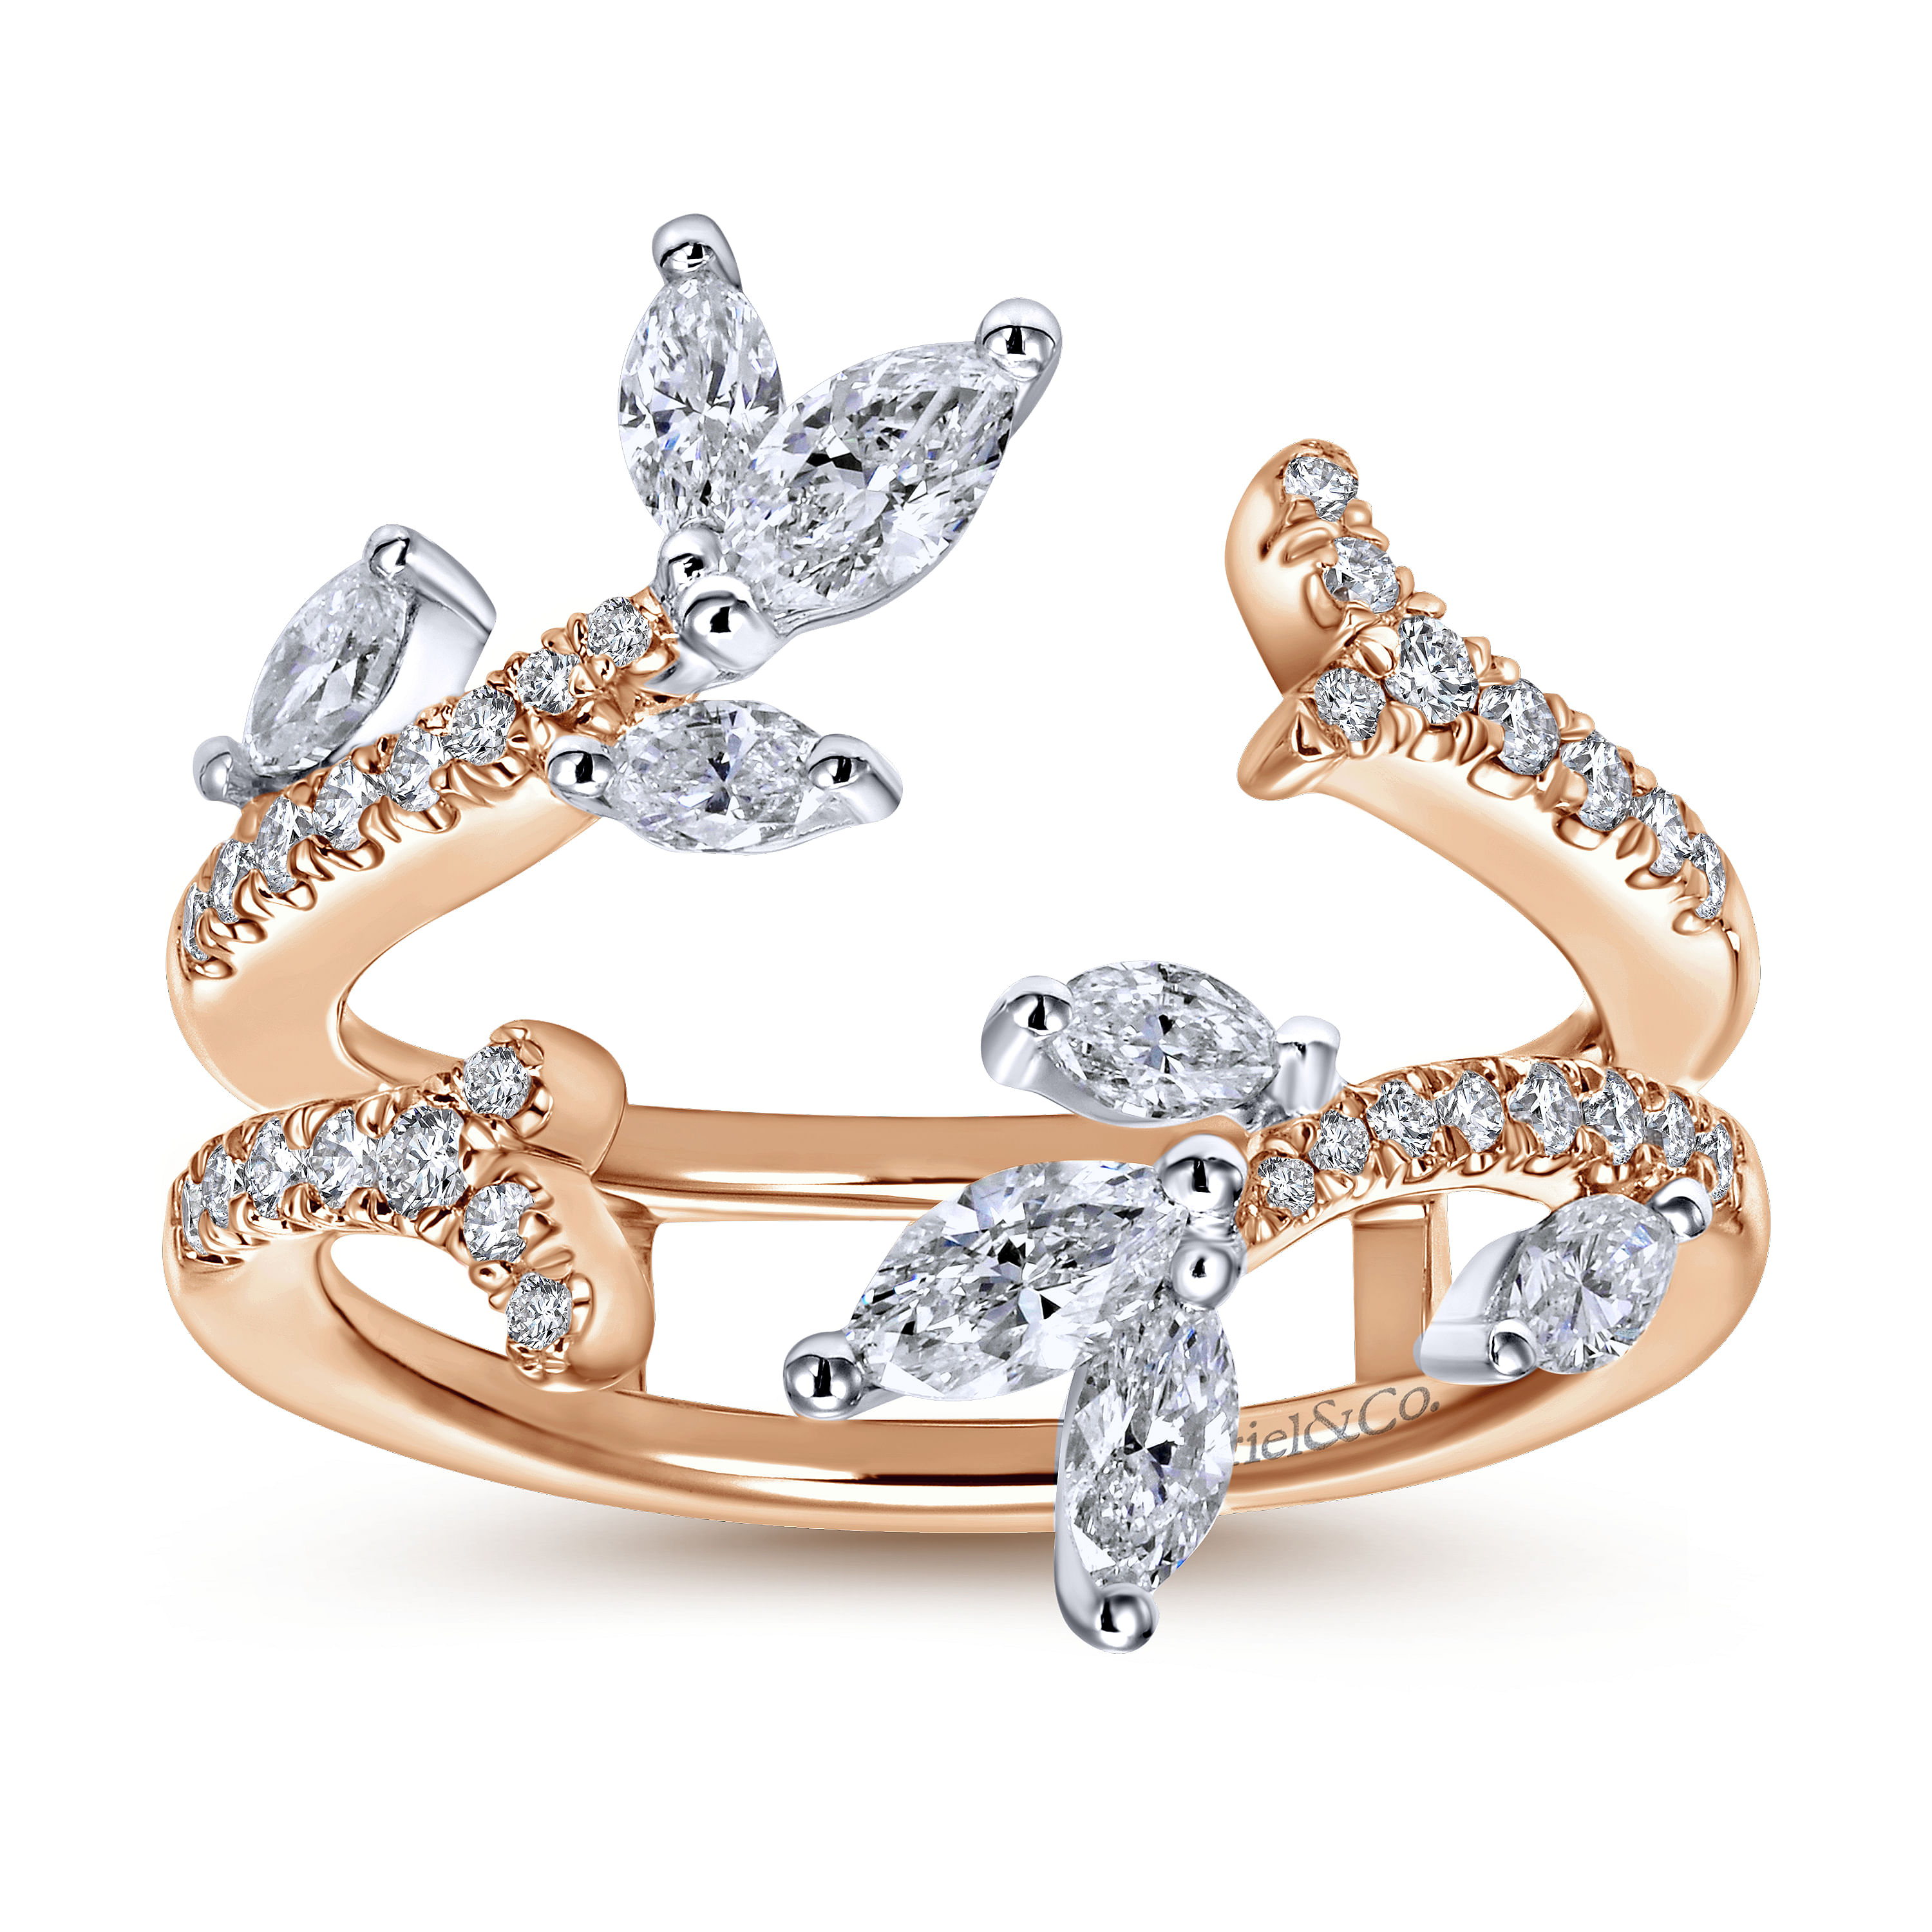 14K White and Rose Gold Marquise and Round Diamond Ring Enhancer